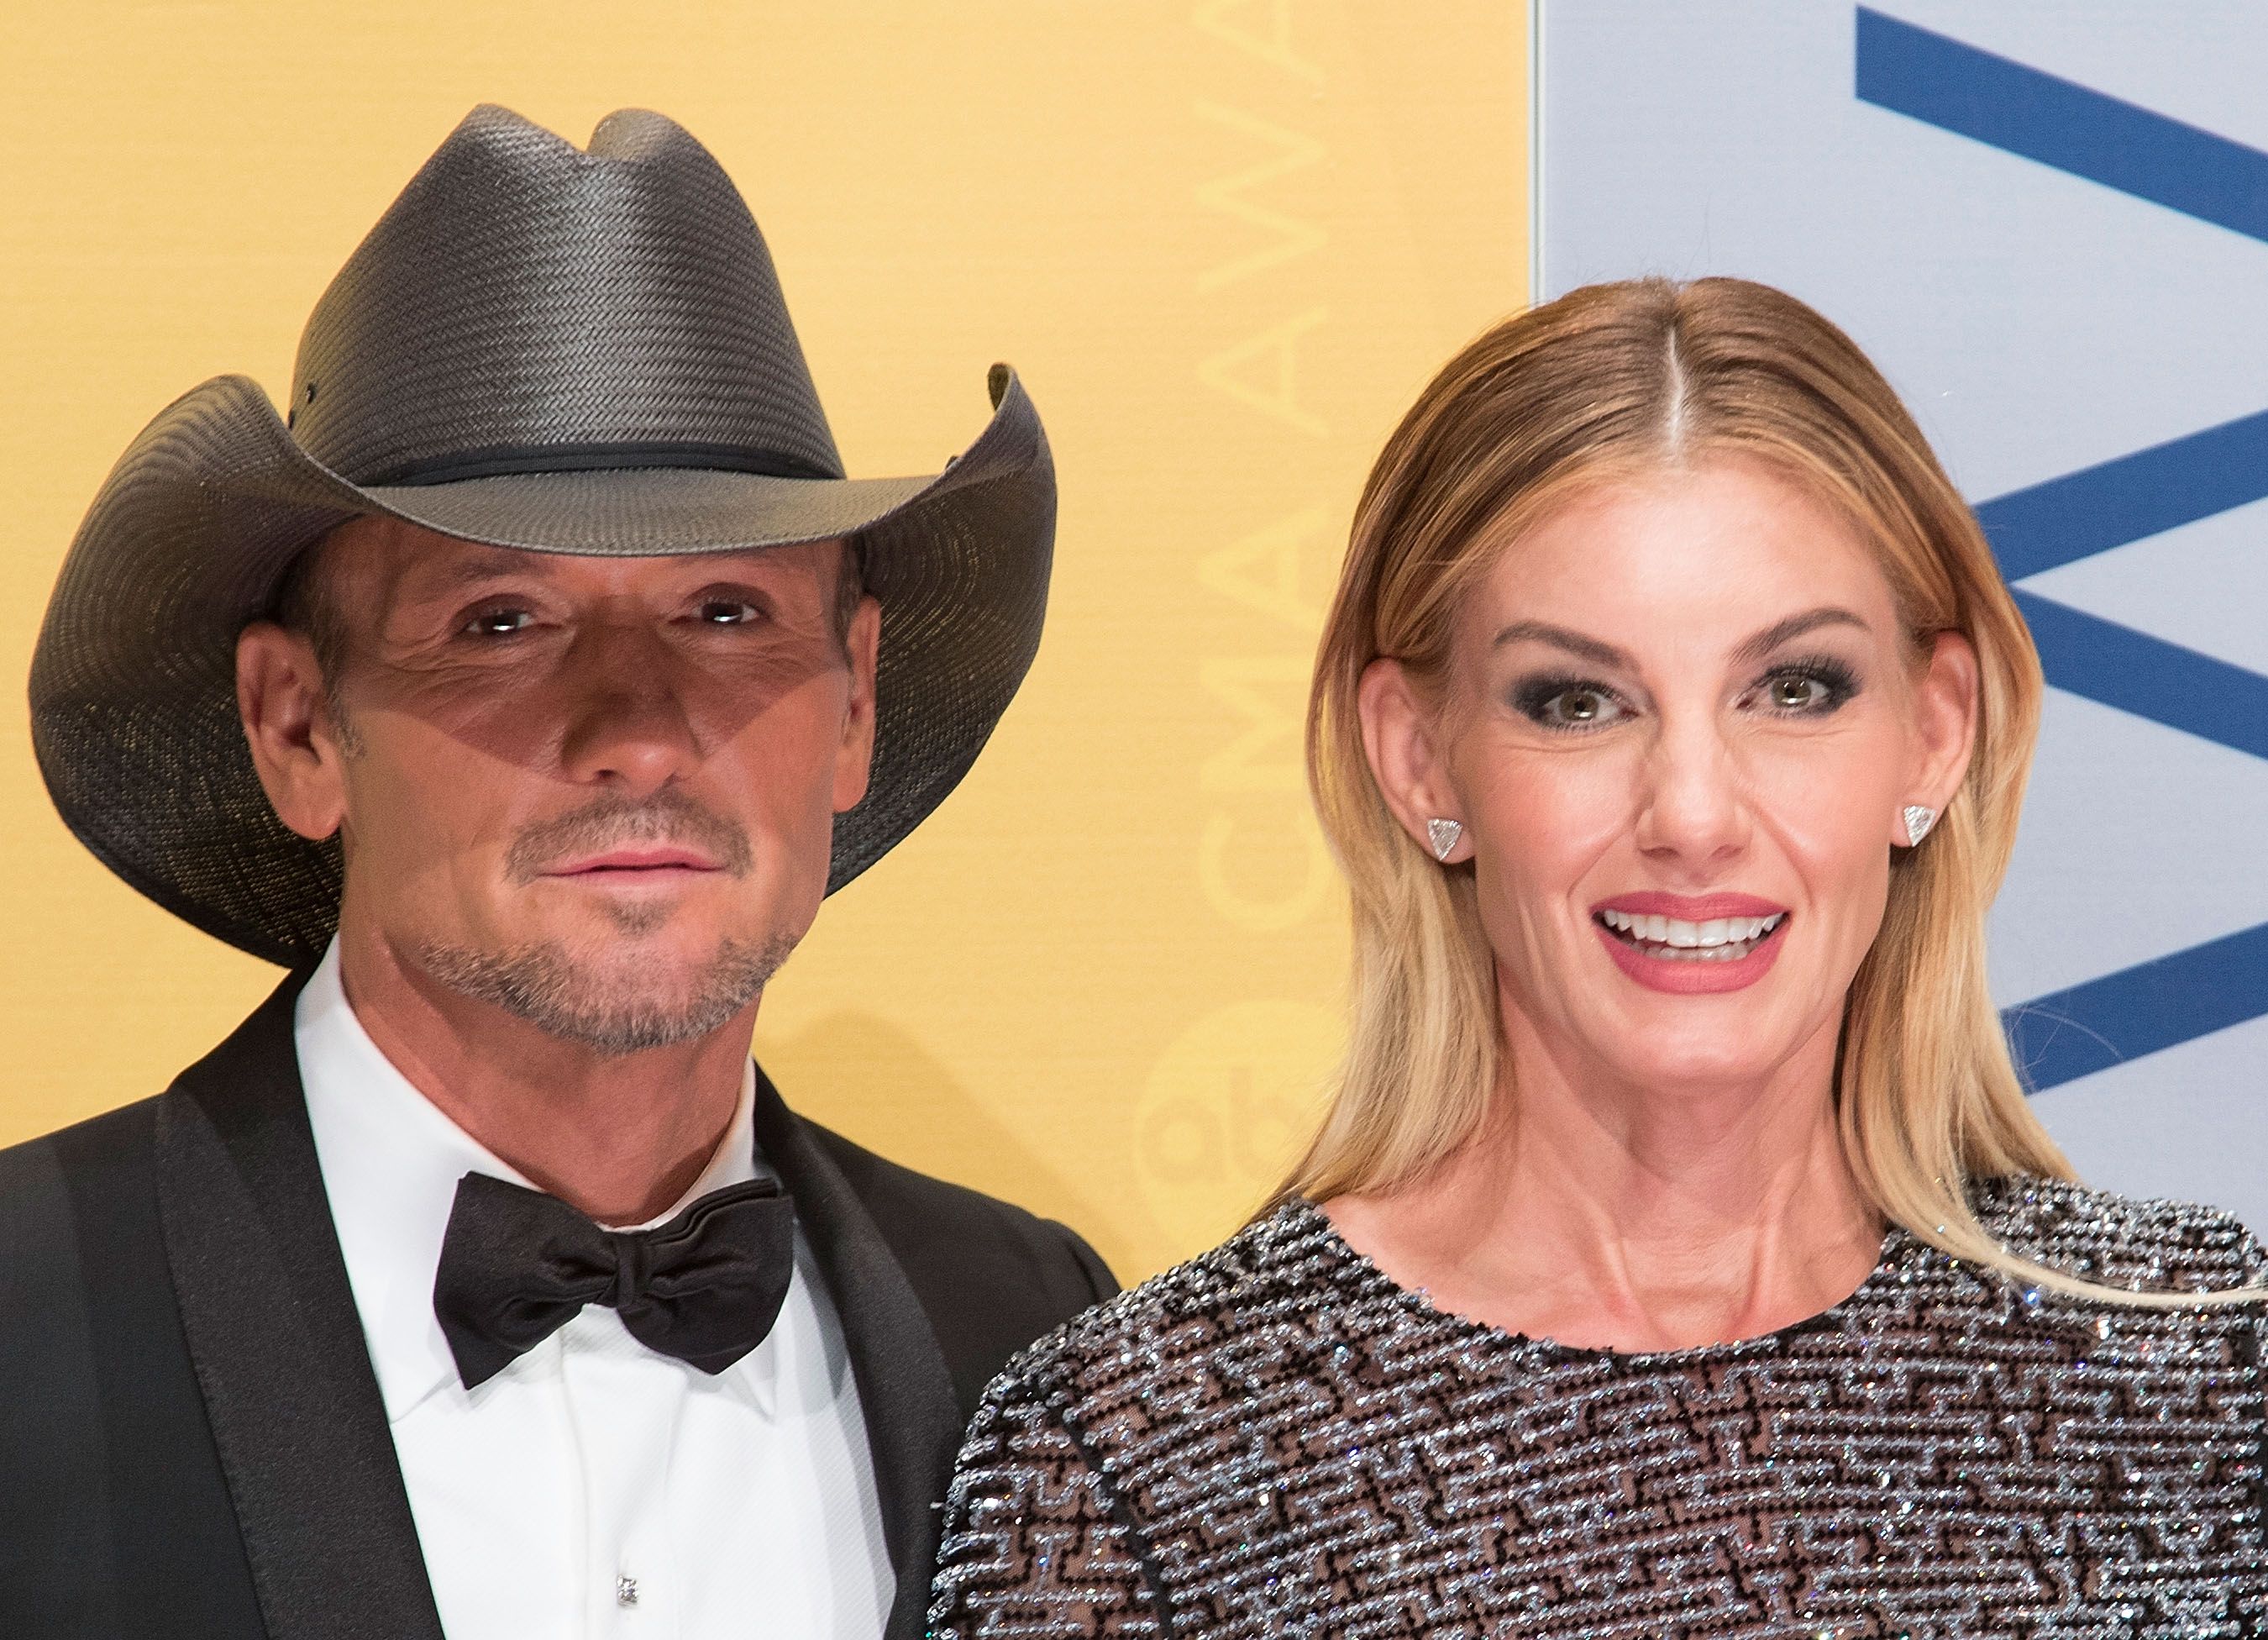 Tim McGraw and Faith Hill during the 50th annual CMA Awards at the Bridgestone Arena on November 2, 2016 in Nashville, Tennessee. | Source: Getty Images